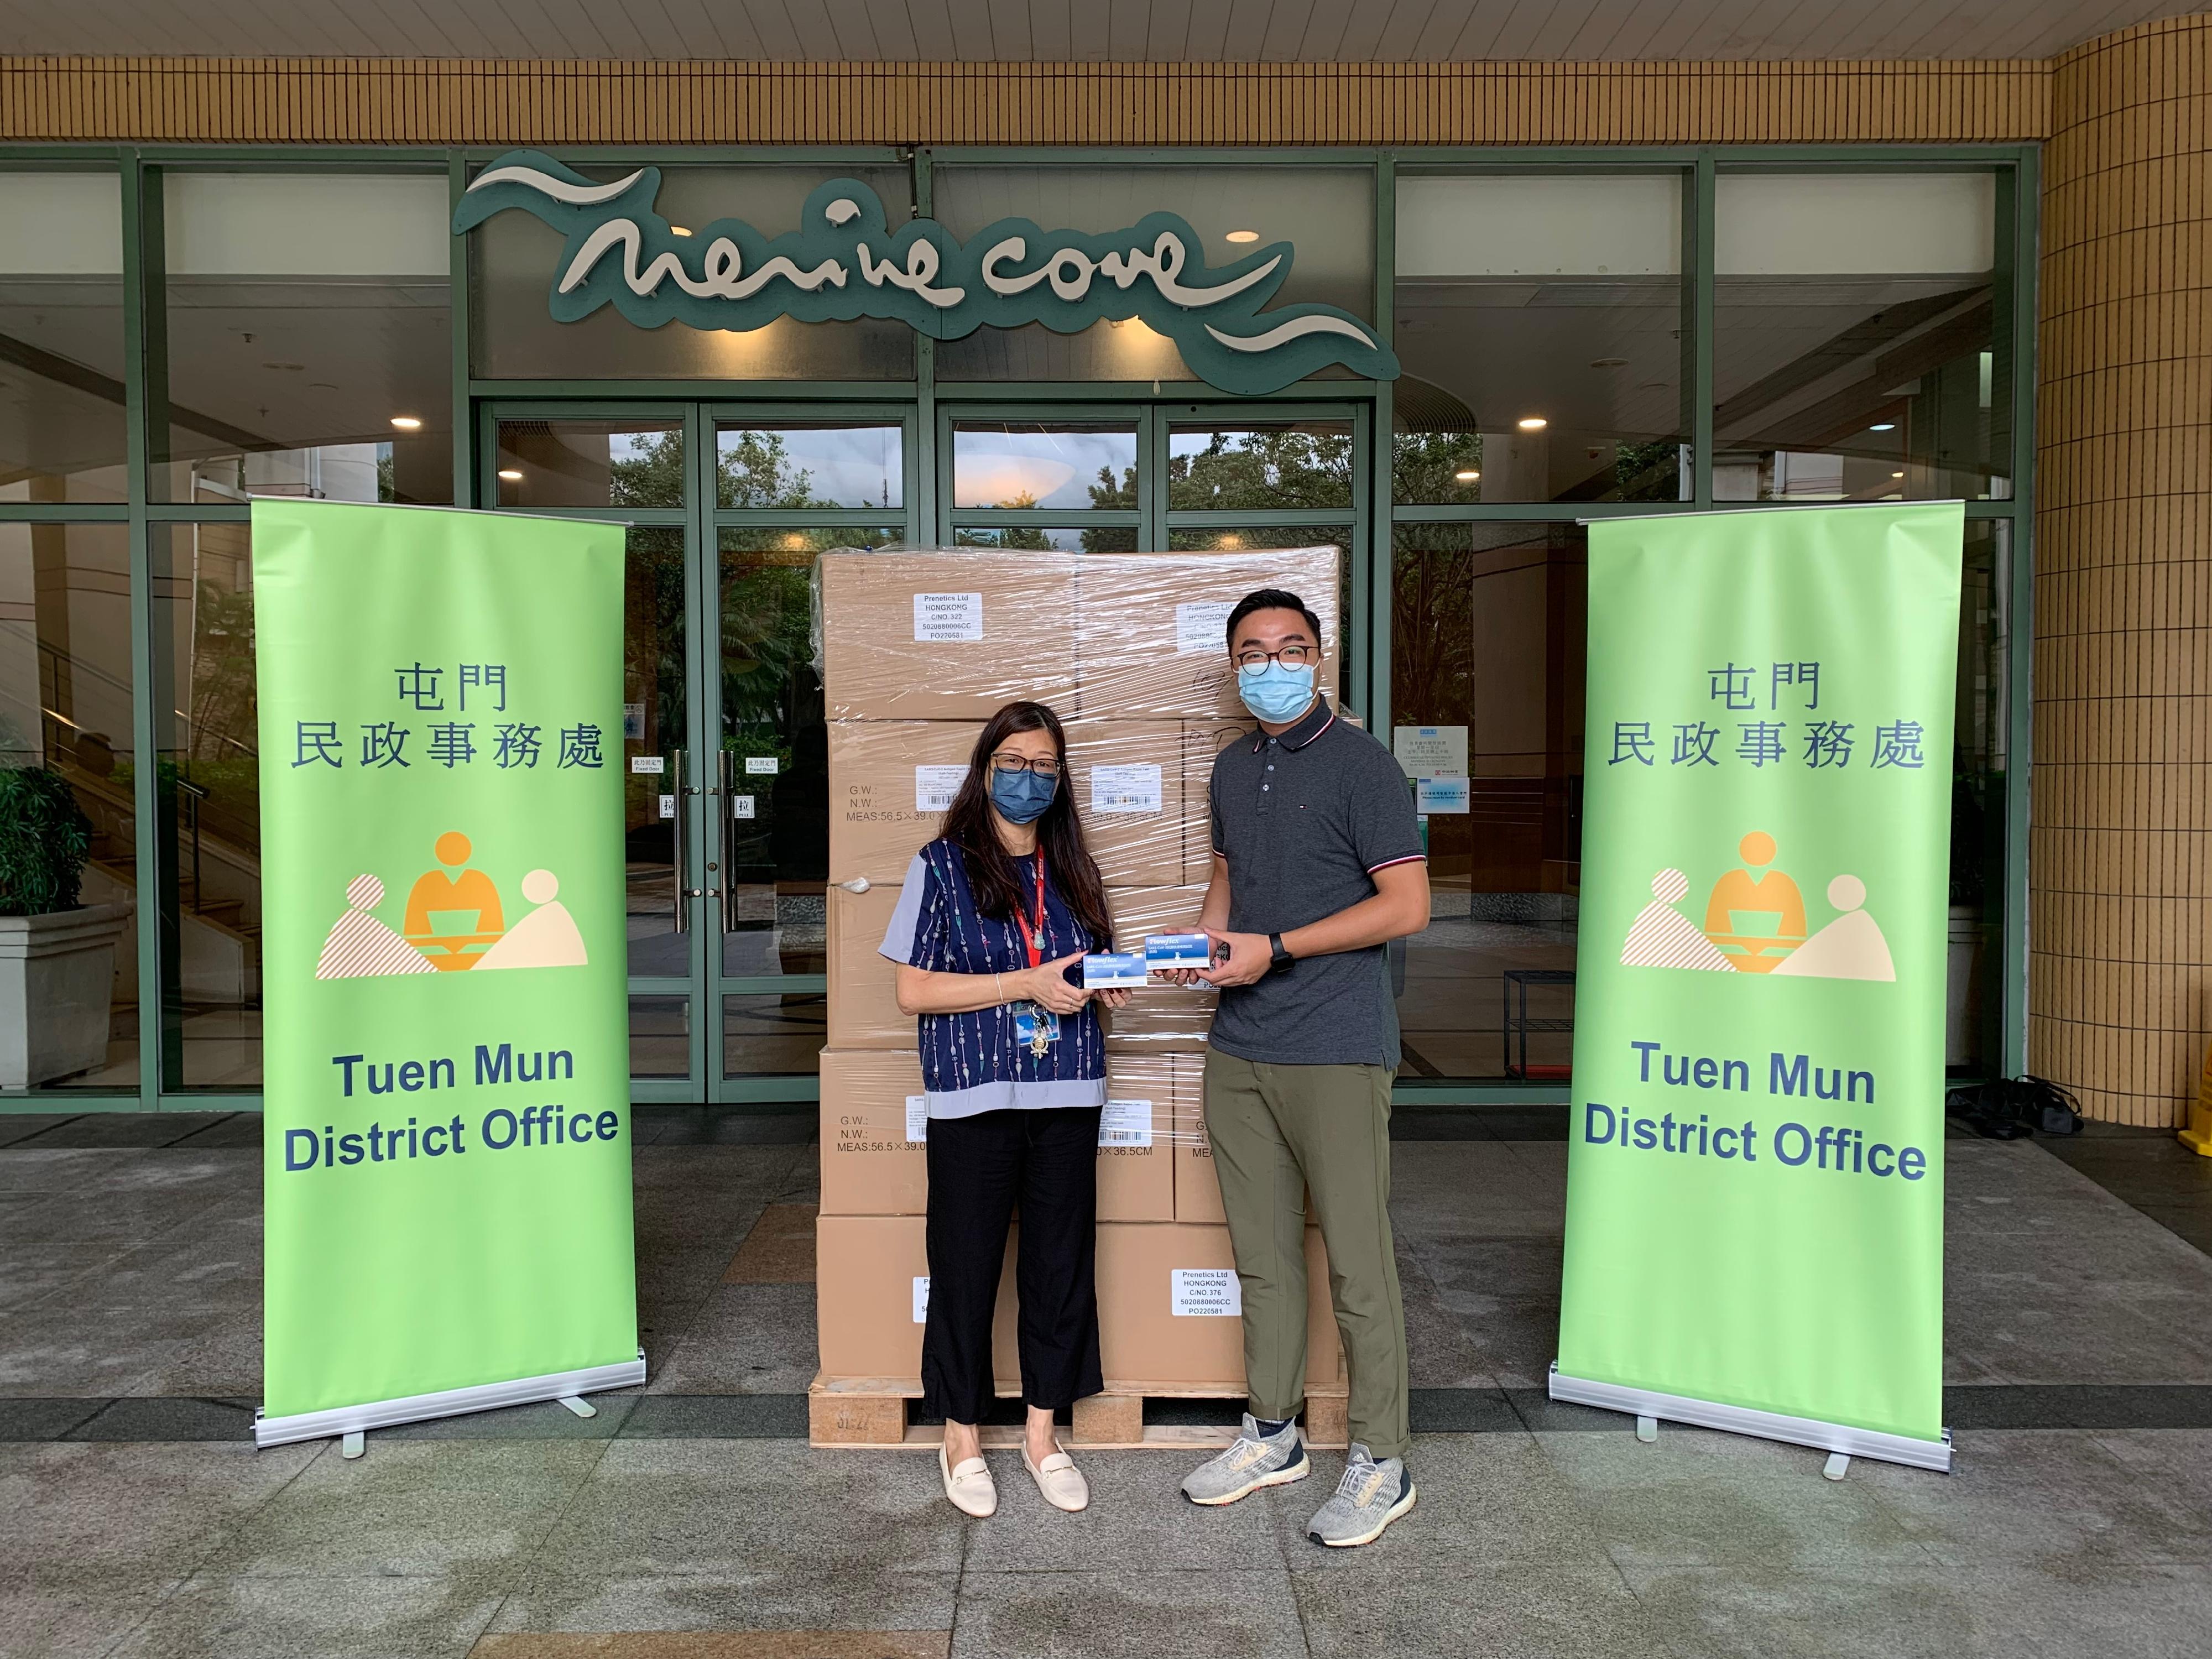 The Tuen Mun District Office today (June 7) distributed COVID-19 rapid test kits to households, cleansing workers and property management staff living and working in Nerine Cove for voluntary testing through the property management company.